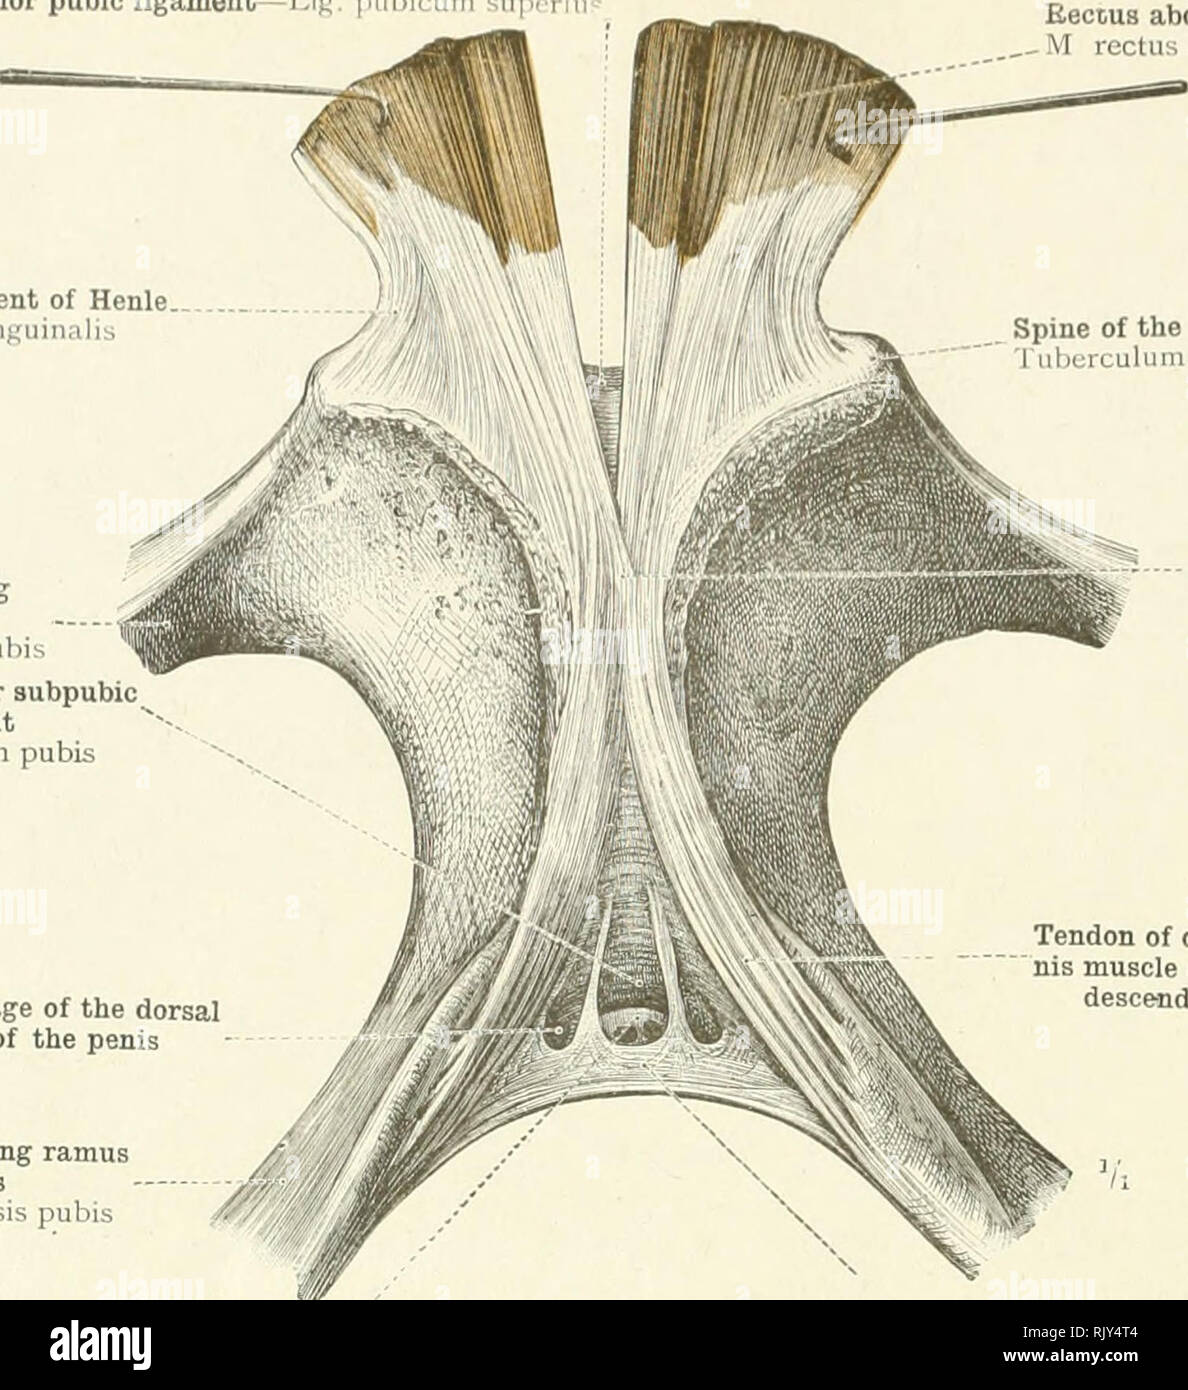 . An atlas of human anatomy for students and physicians. Anatomy. 220 THE IRTICULATIONS OF THE LOWER LIMB Superior pubic ligament — Lig. pubii um u. Rectus abdominis muscle  -M rectus abdominis Spine of the pubis Tuberculum pubicum Interlacing of the fibres of the tendons of origin of the rectus abdominis muscles' Tendon of origin of the rectus abdomi- muscle attached to the inferior or descending ramus of the pubis Ligament of Henle Falx inguinalis Superior or ascending ramus of the pubis Ramus superior ossis pubis Inferior pubic or subpubic ligament Lig. arcuatum pubis Foramen for the passag Stock Photo